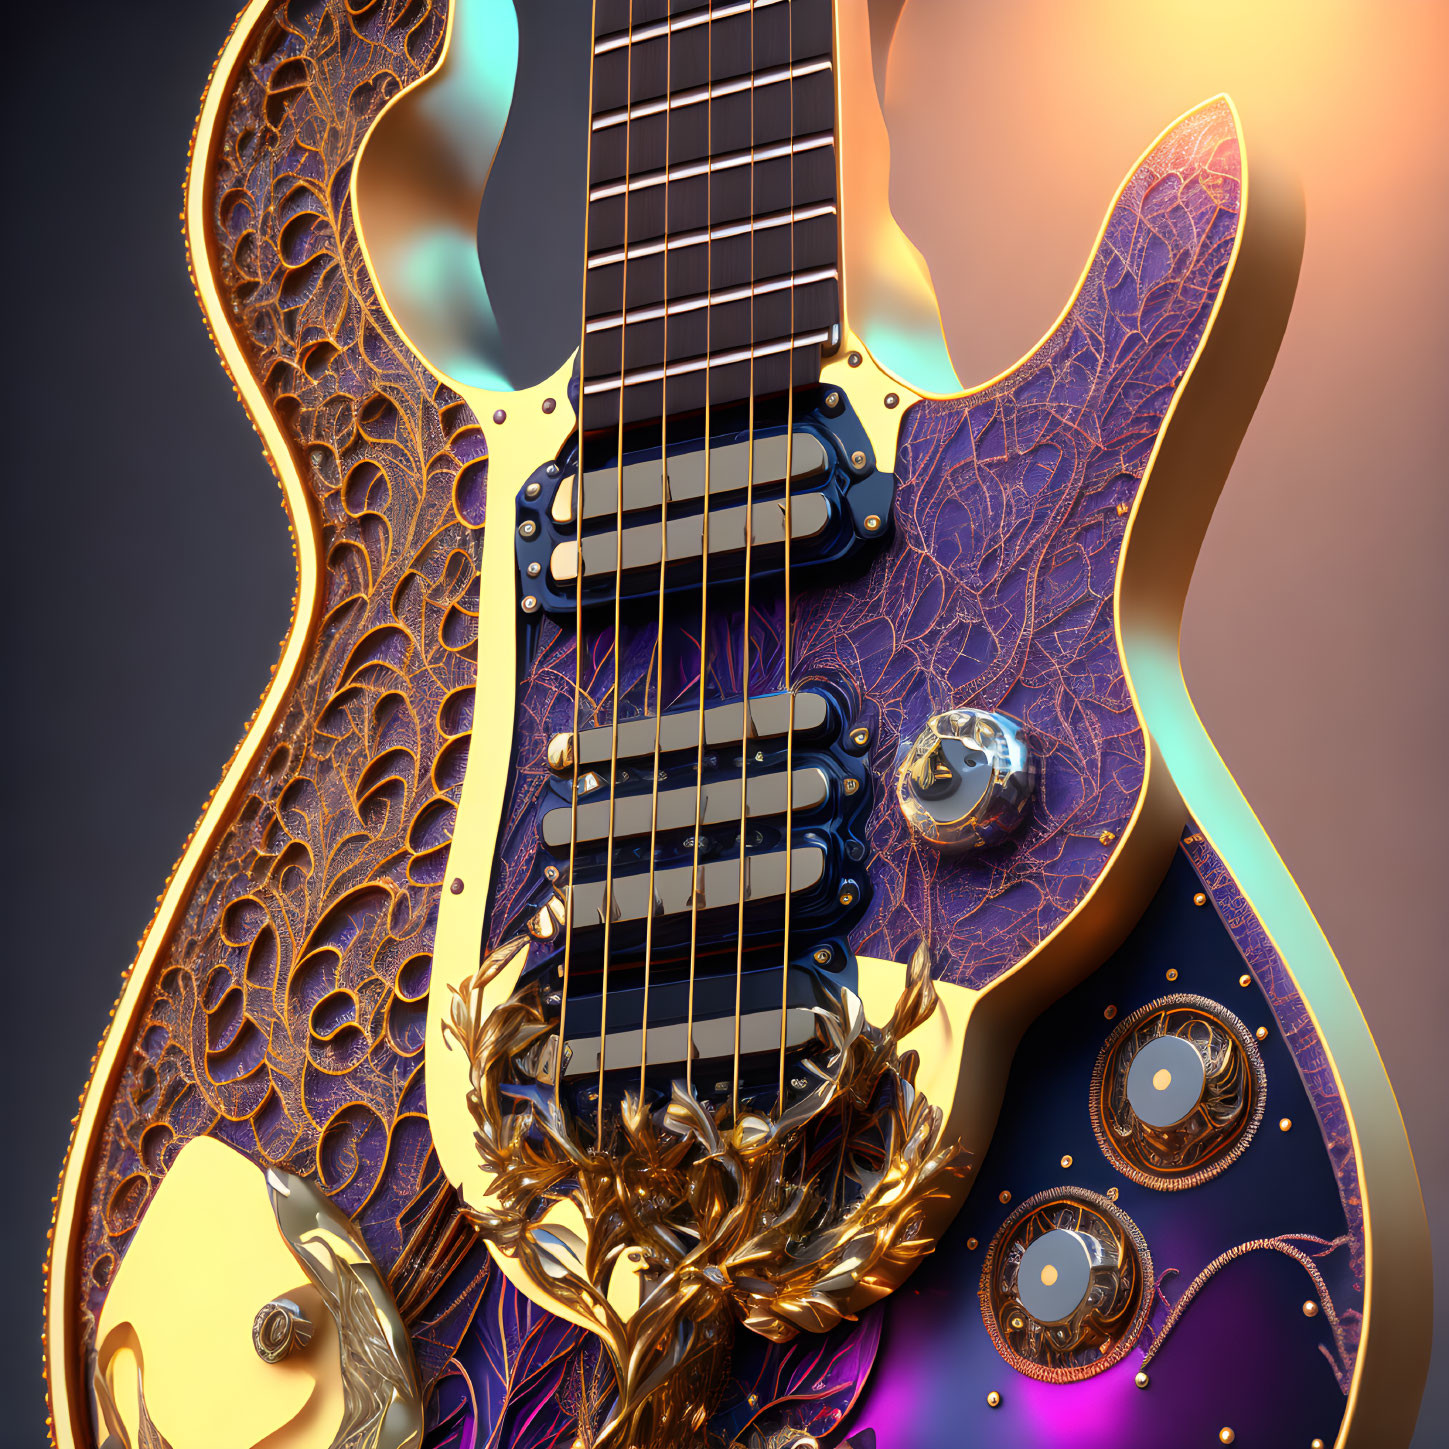 Ornate Fractal Patterned Electric Guitar on Two-Tone Background